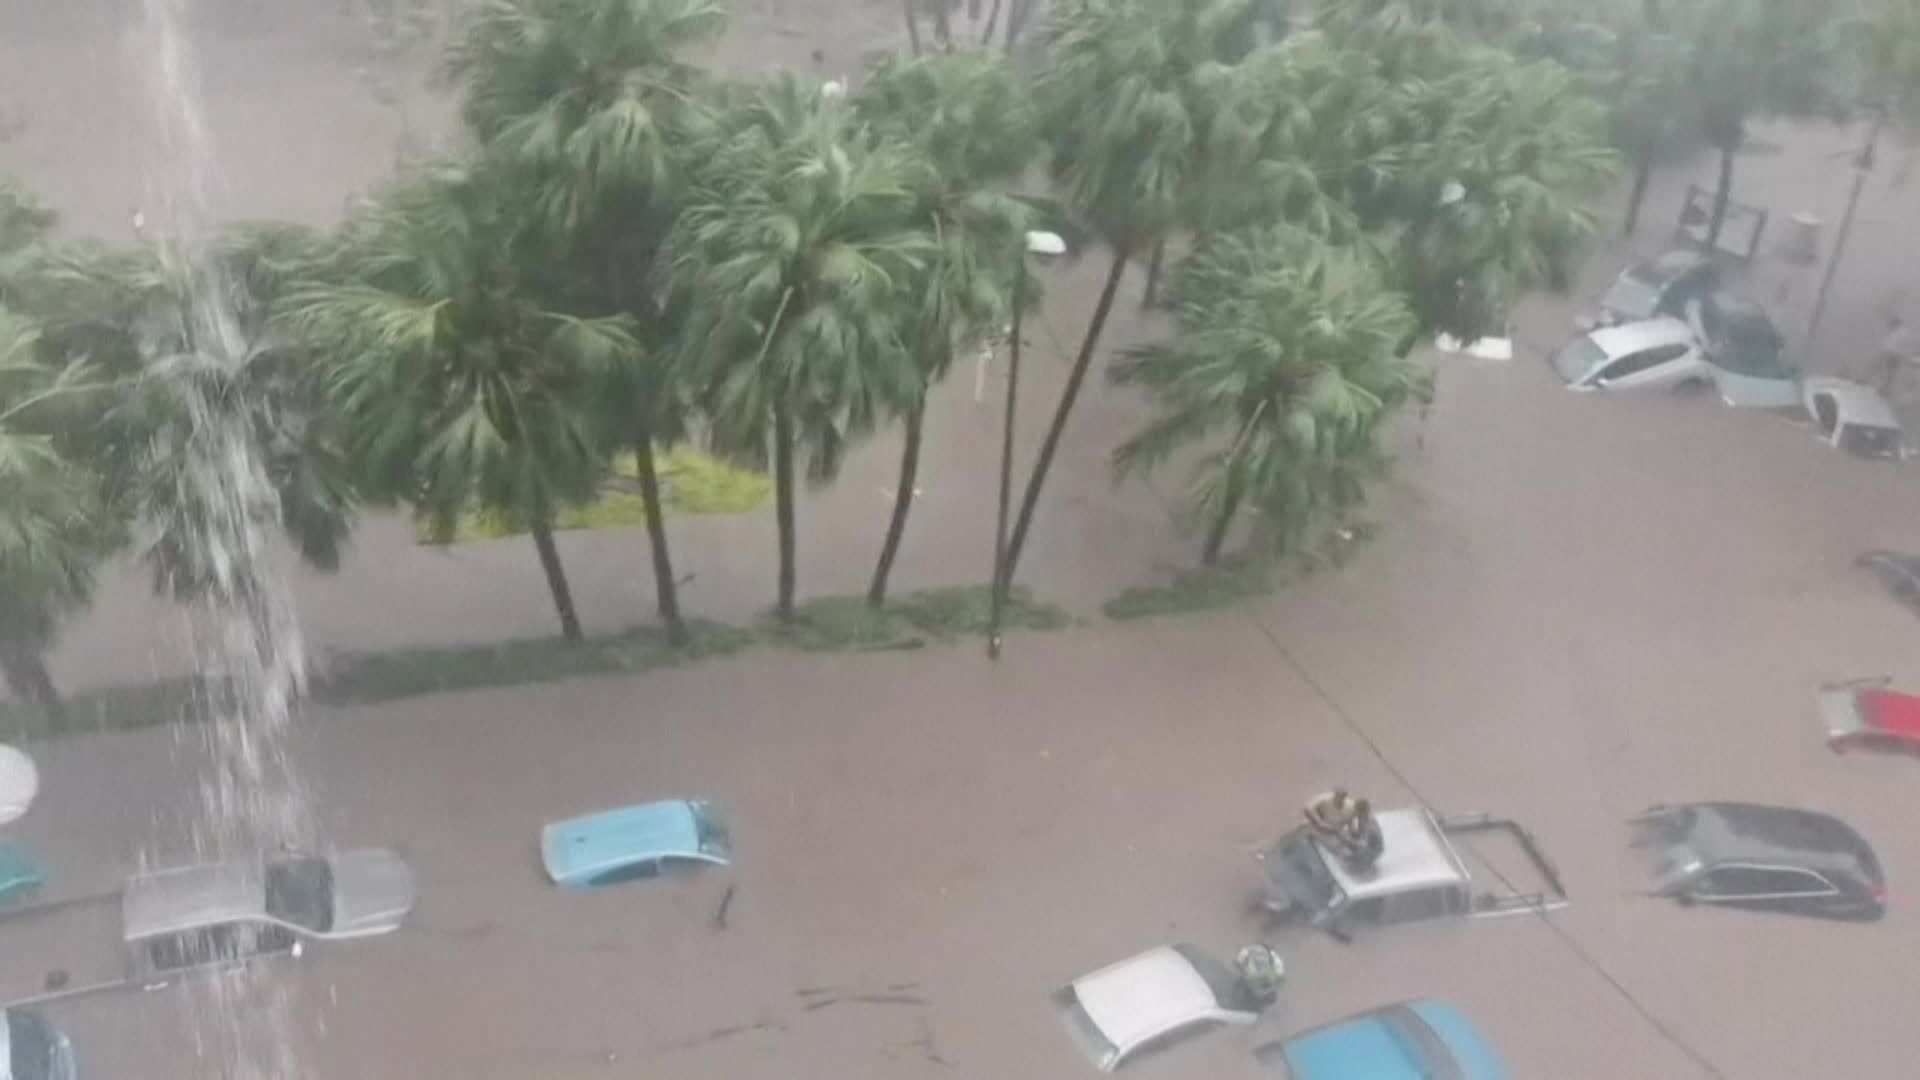 Tropical Cyclone Belal pummeled the Indian Ocean islands of Mauritius and Reunion with strong winds, heavy rain, and massive flooding.